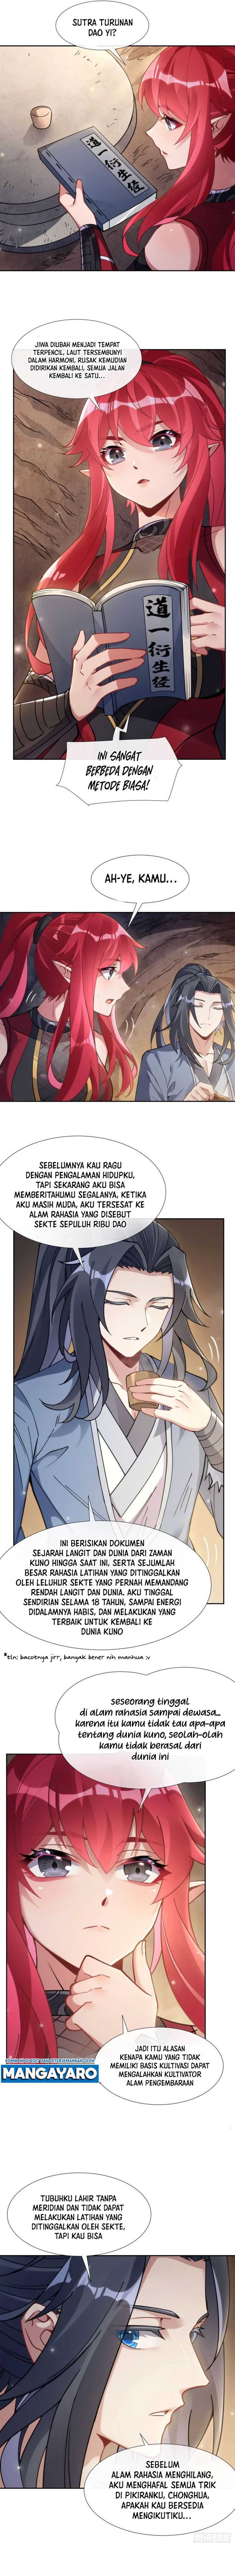 Dilarang COPAS - situs resmi www.mangacanblog.com - Komik my female apprentices are all big shots from the future 152 - chapter 152 153 Indonesia my female apprentices are all big shots from the future 152 - chapter 152 Terbaru 4|Baca Manga Komik Indonesia|Mangacan